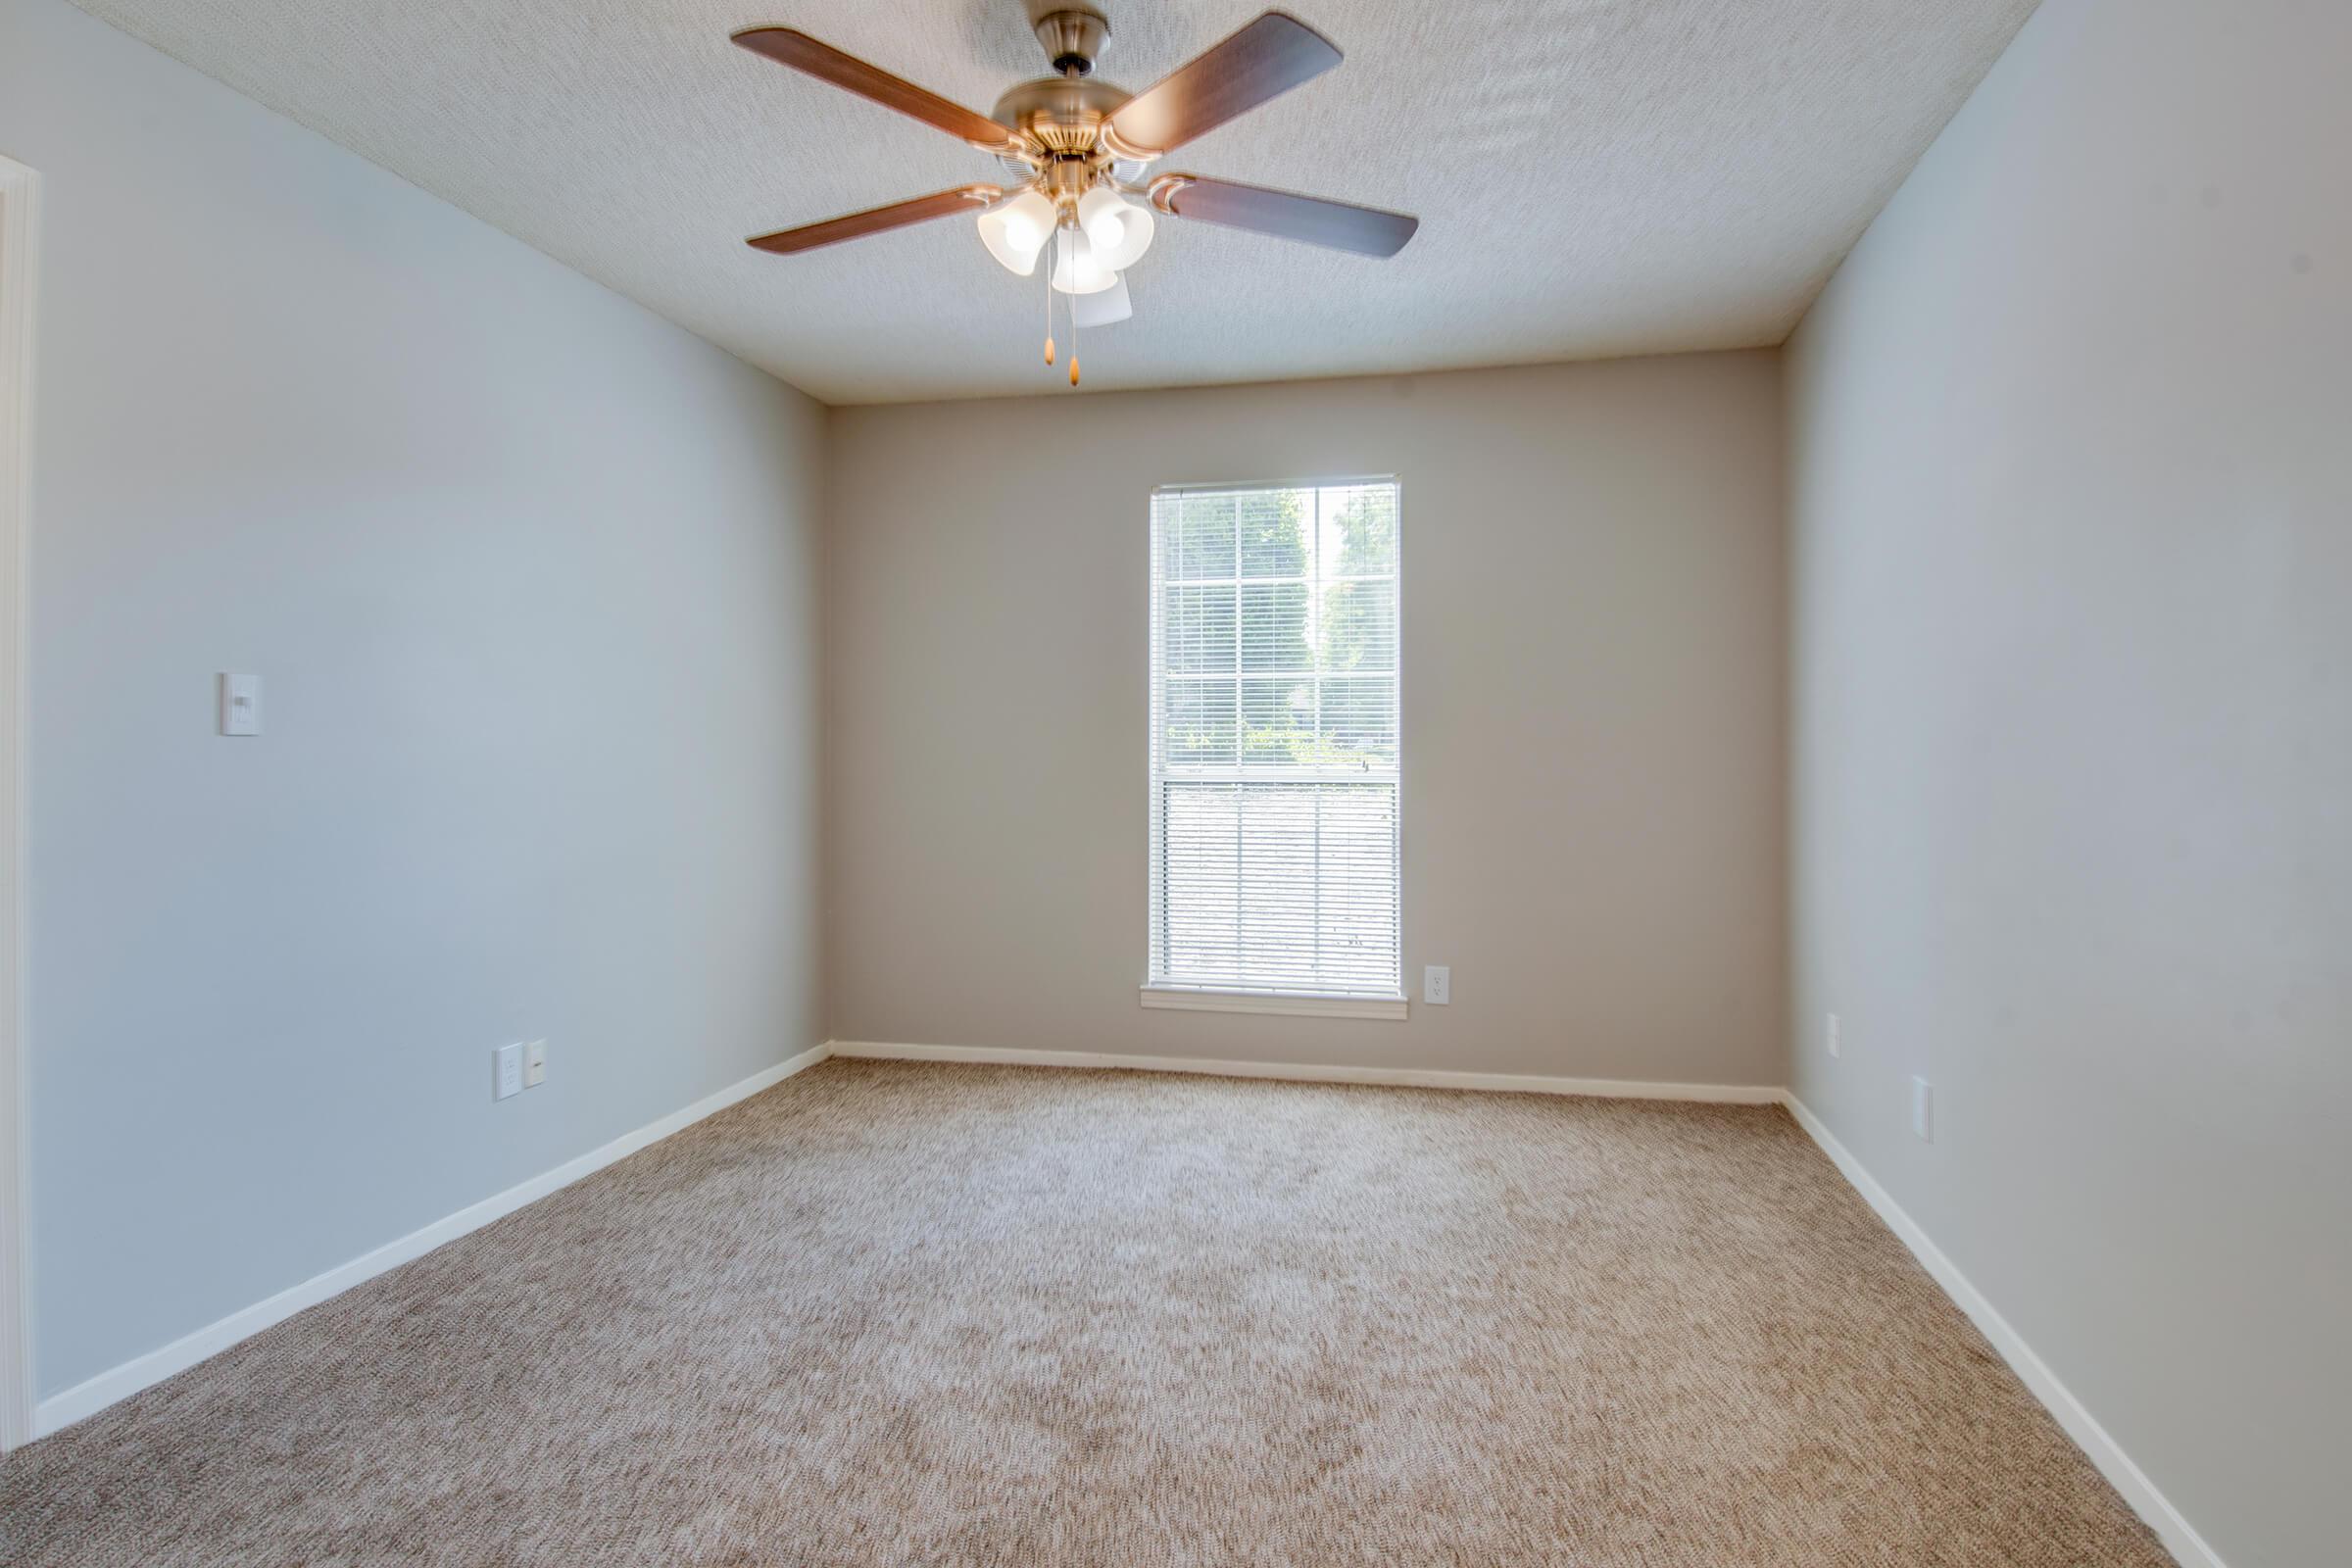 Bedroom Ceiling Fans at Northridge Apartments